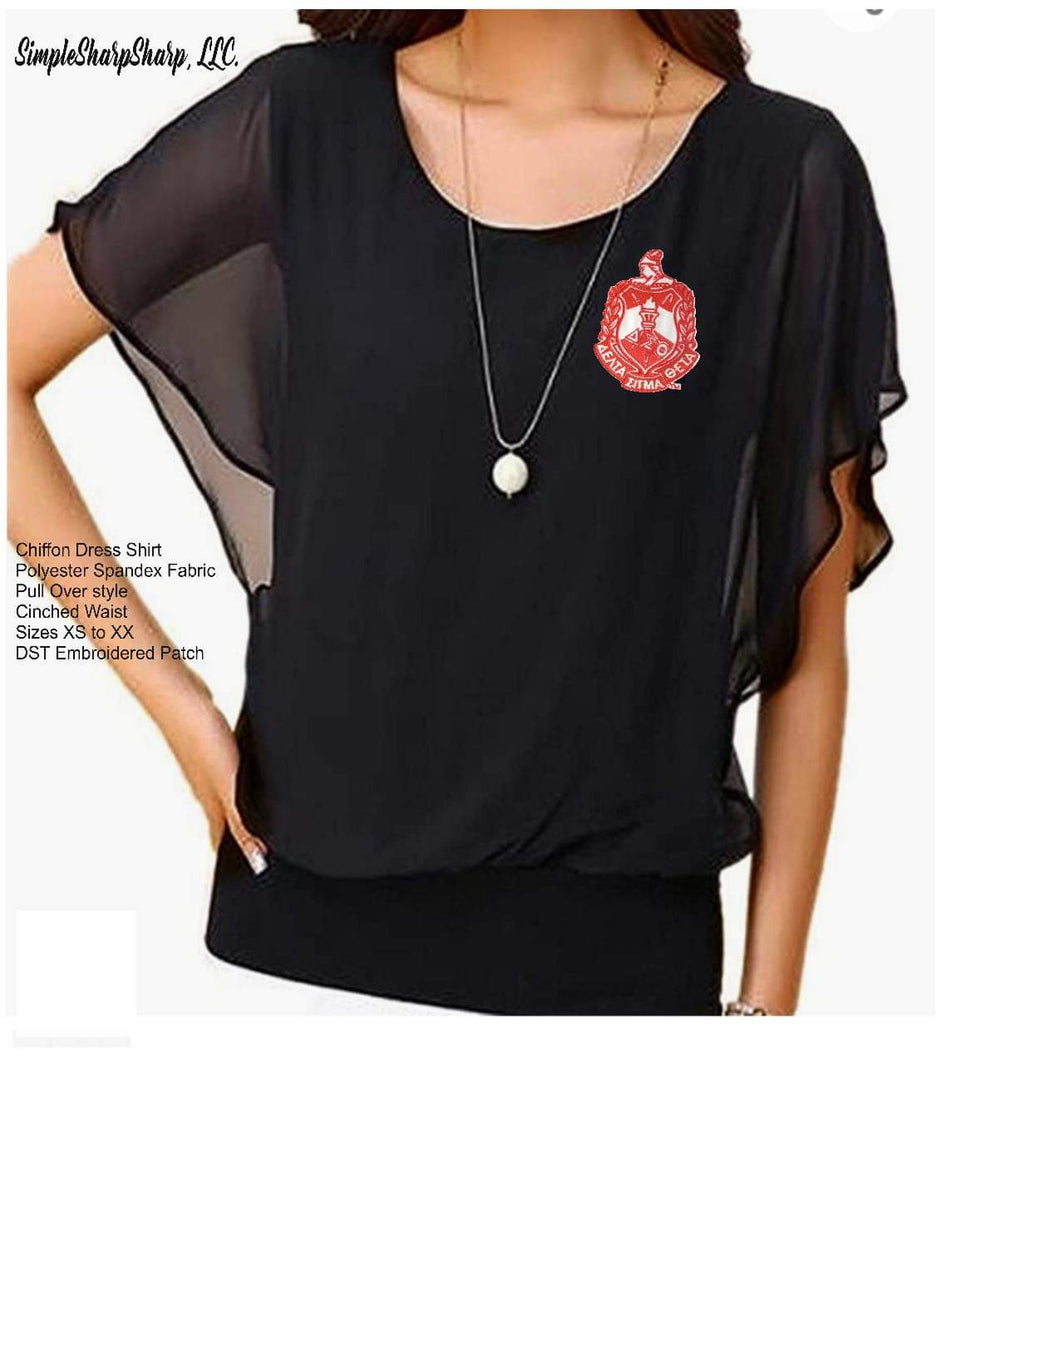 Black Chiffon Dress Top with DST Embroidered Shield